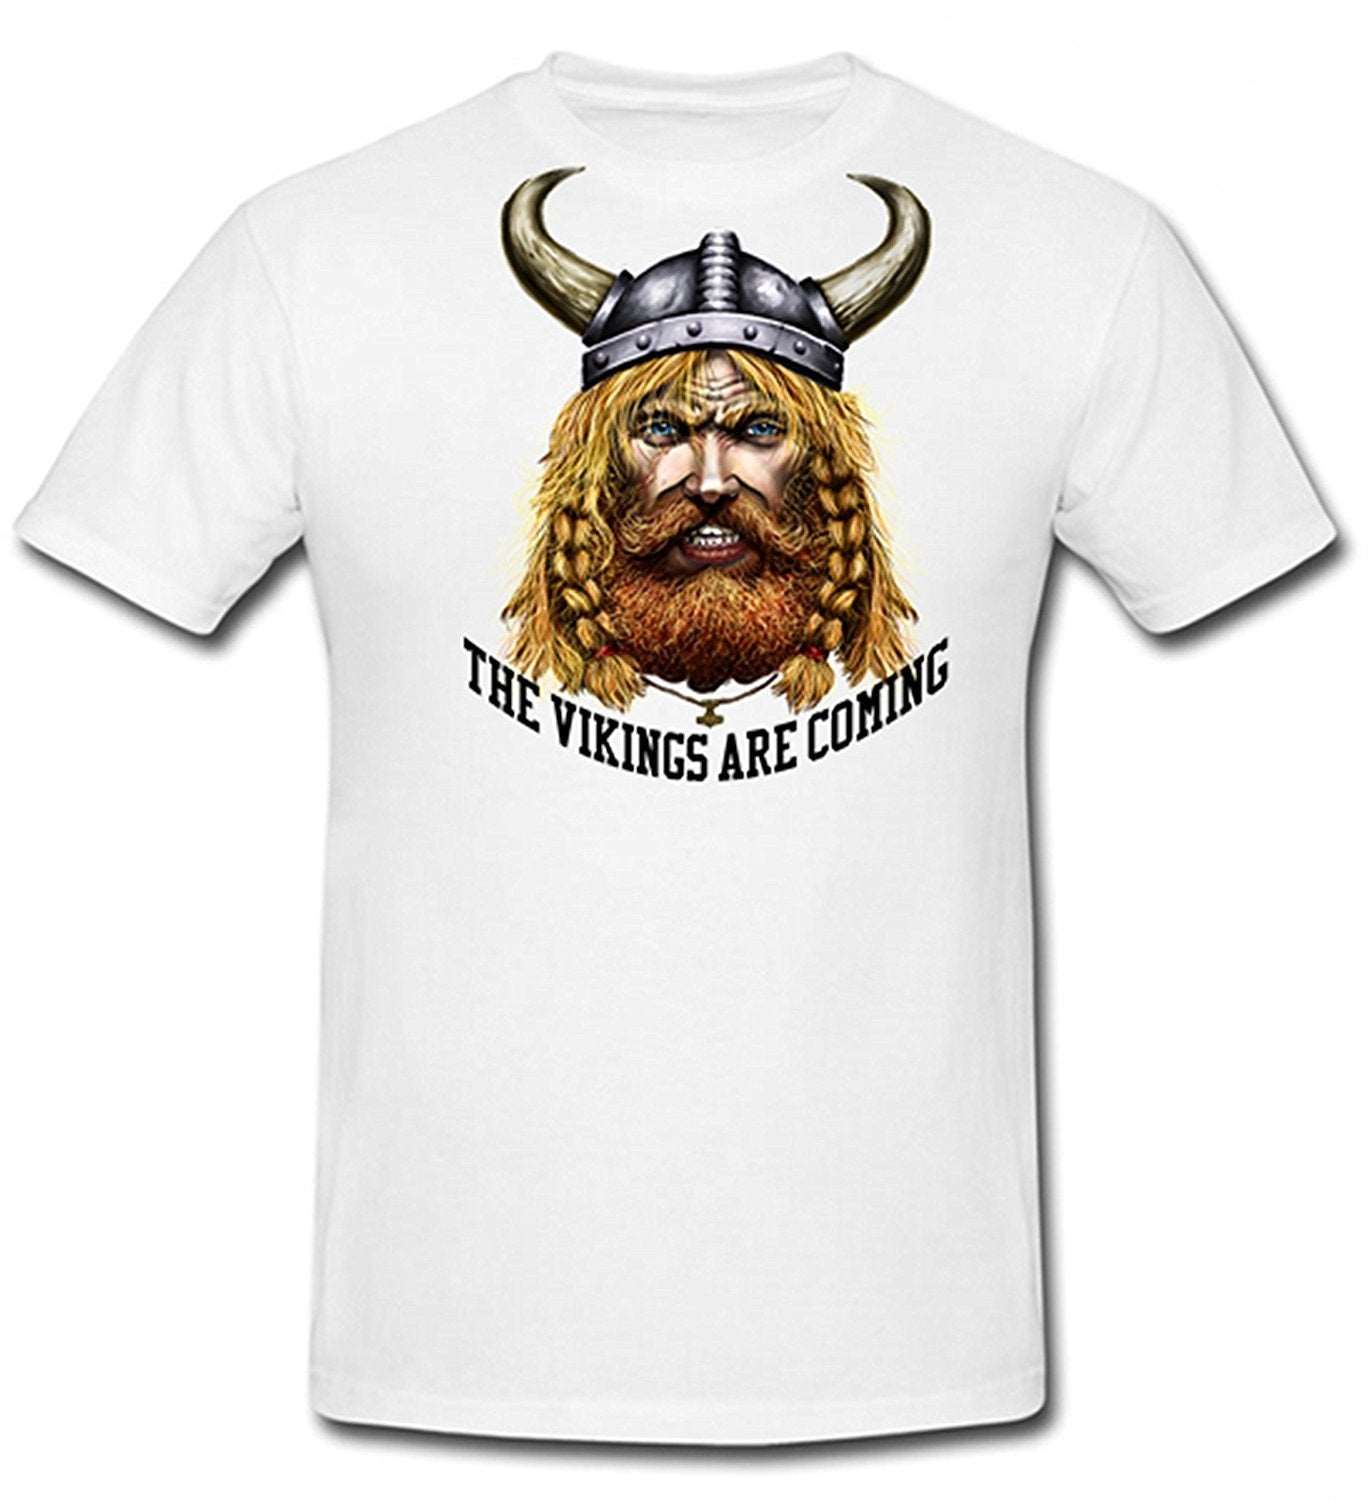 Bear Essentials Clothing. The Vikings Are Coming (S, Black) - Army 1157 kit X-Large / White Army 1157 Kit Veterans Owned Business